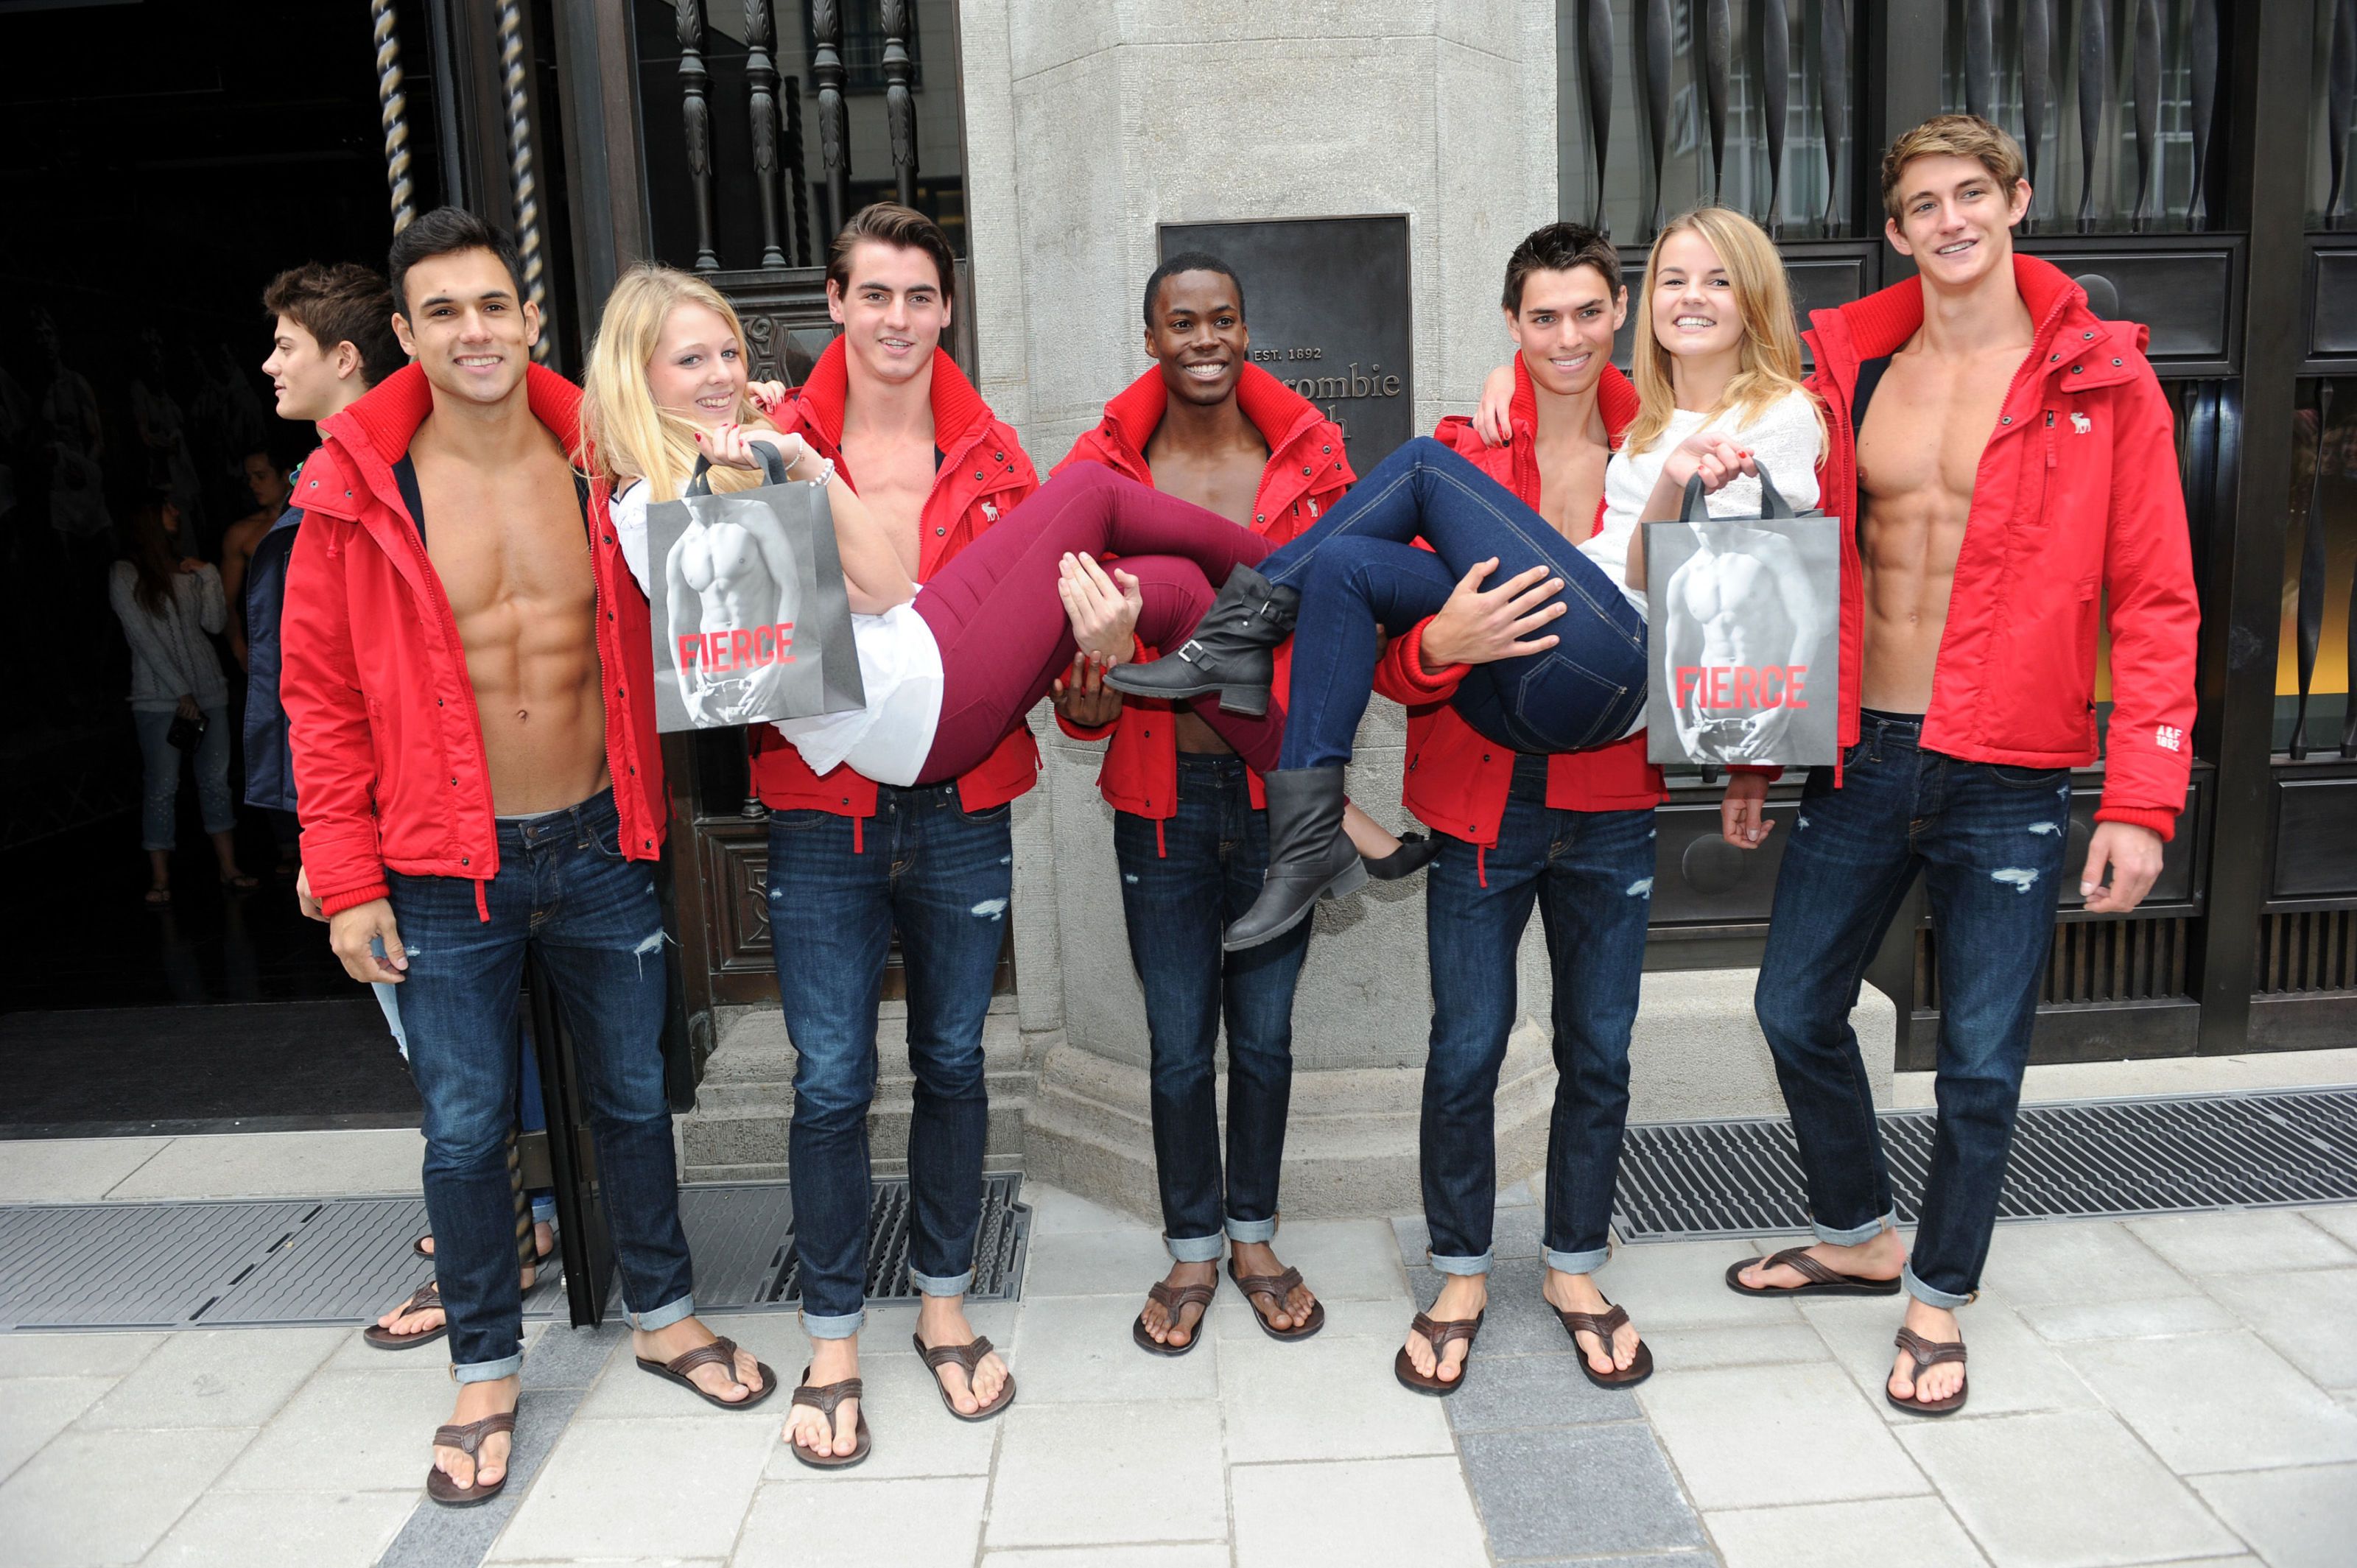 abercrombie & fitch employees